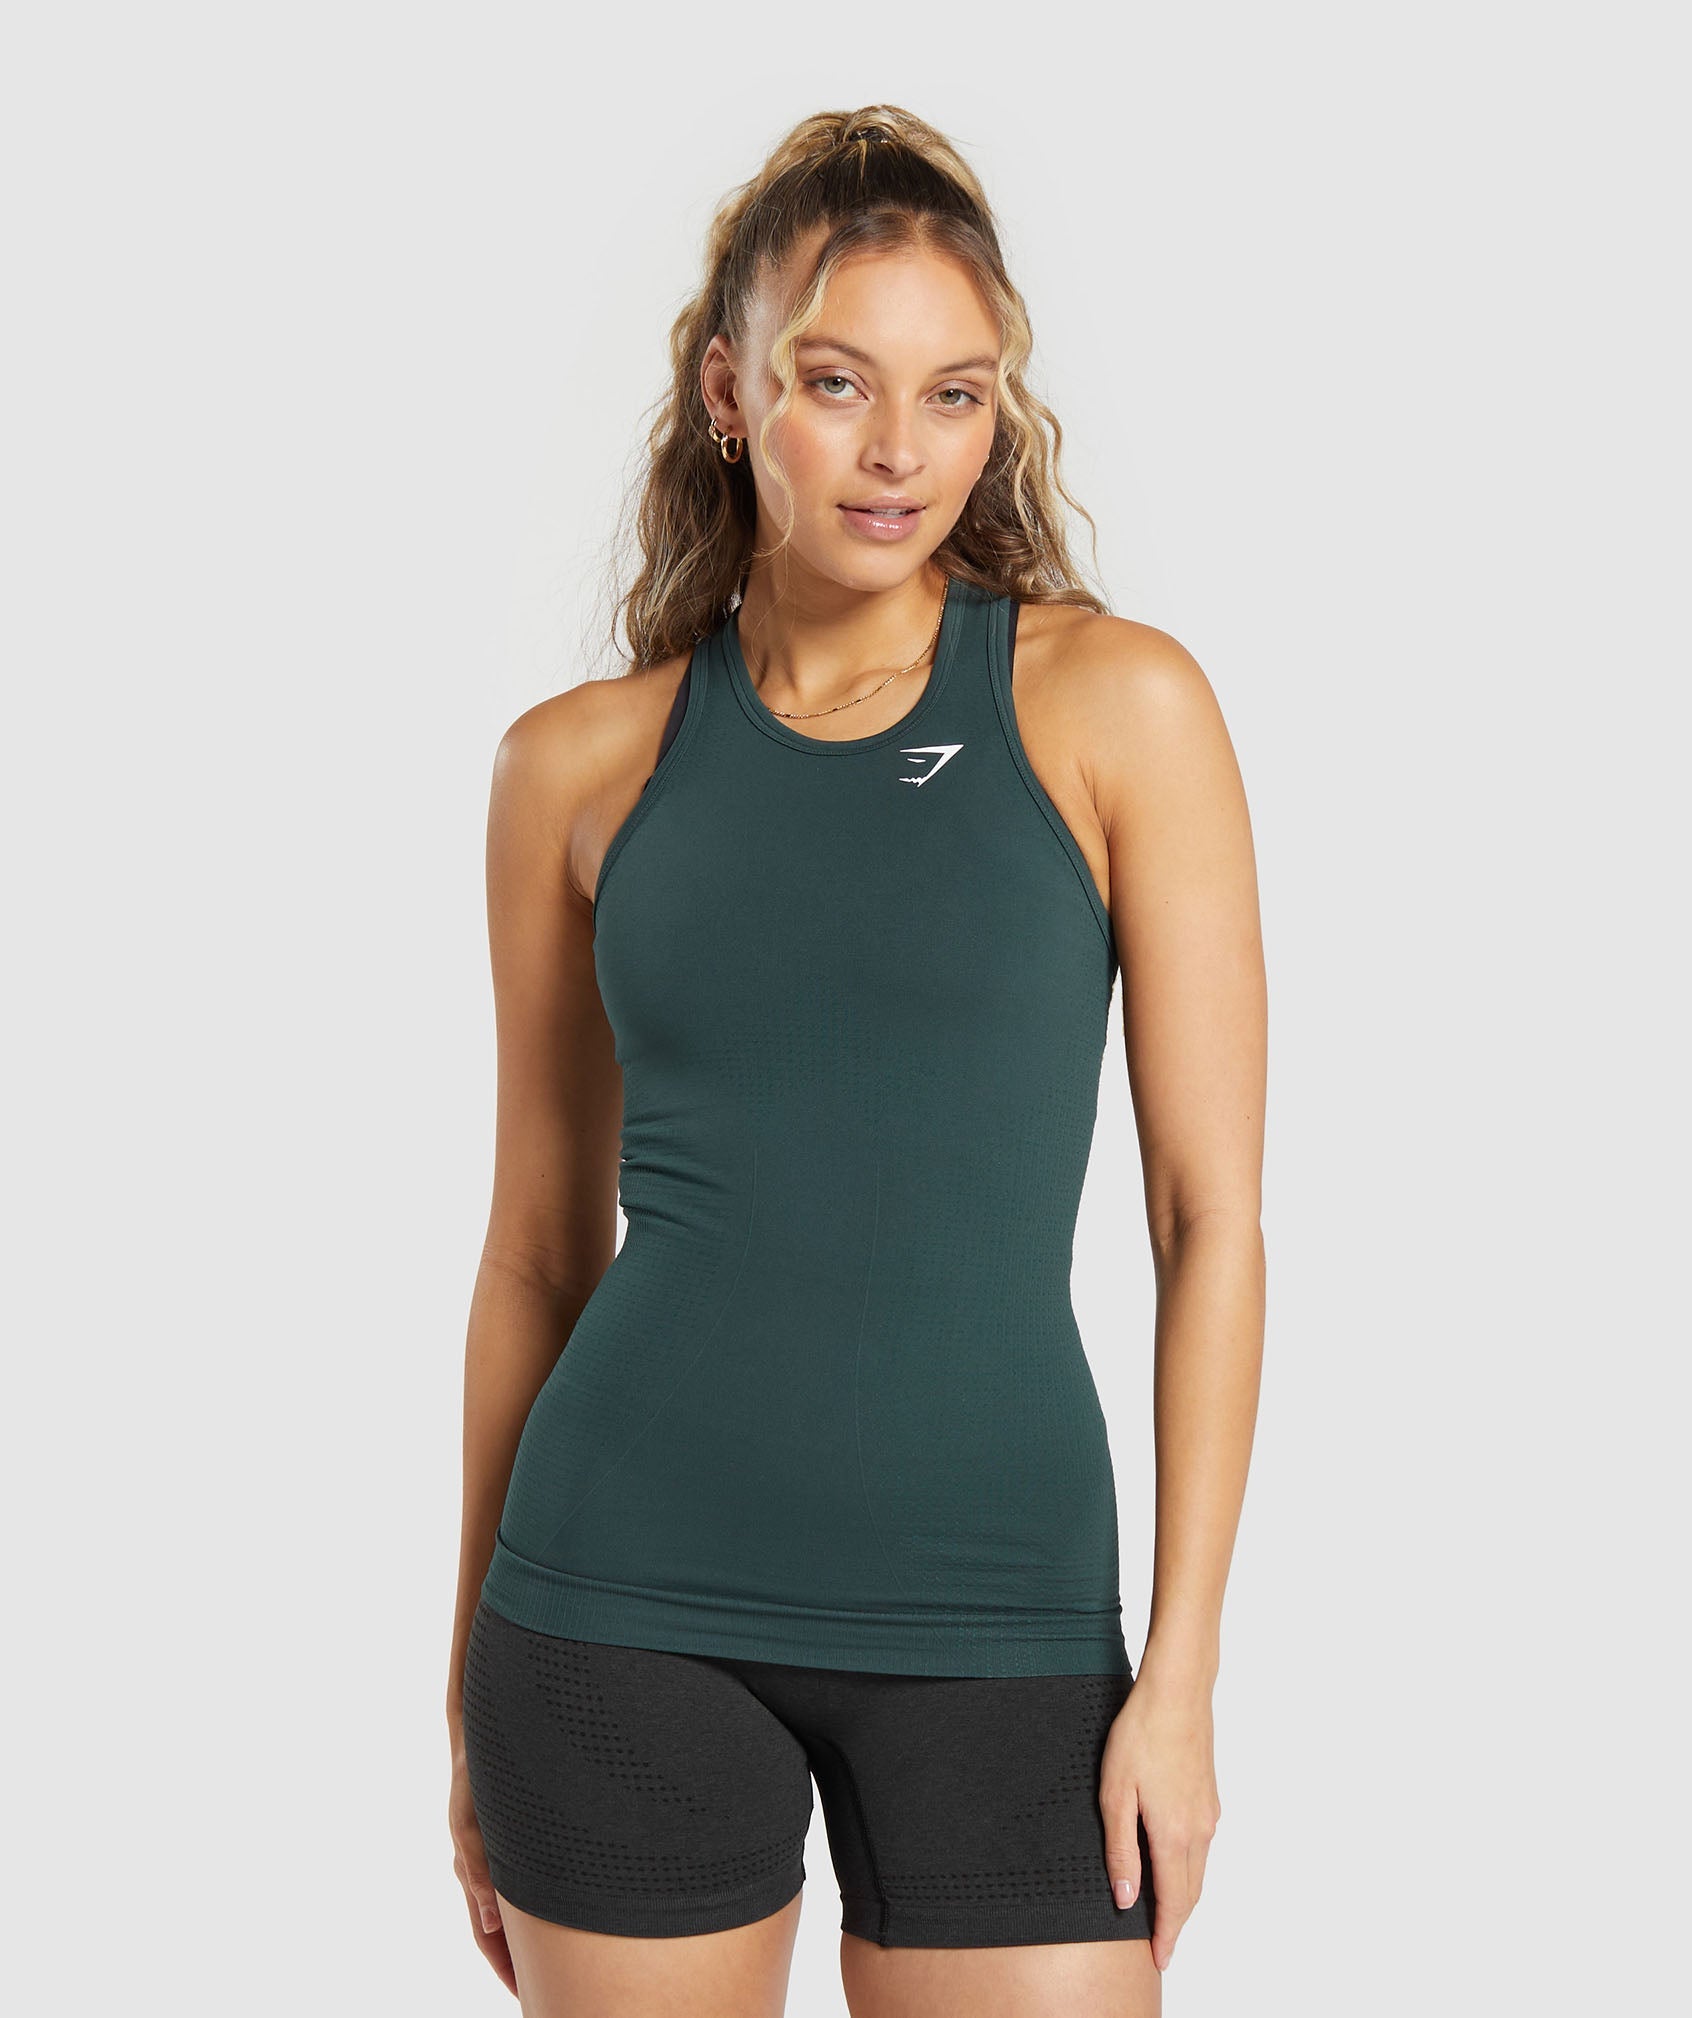 Vital Seamless 2.0 Vest in {{variantColor} is out of stock